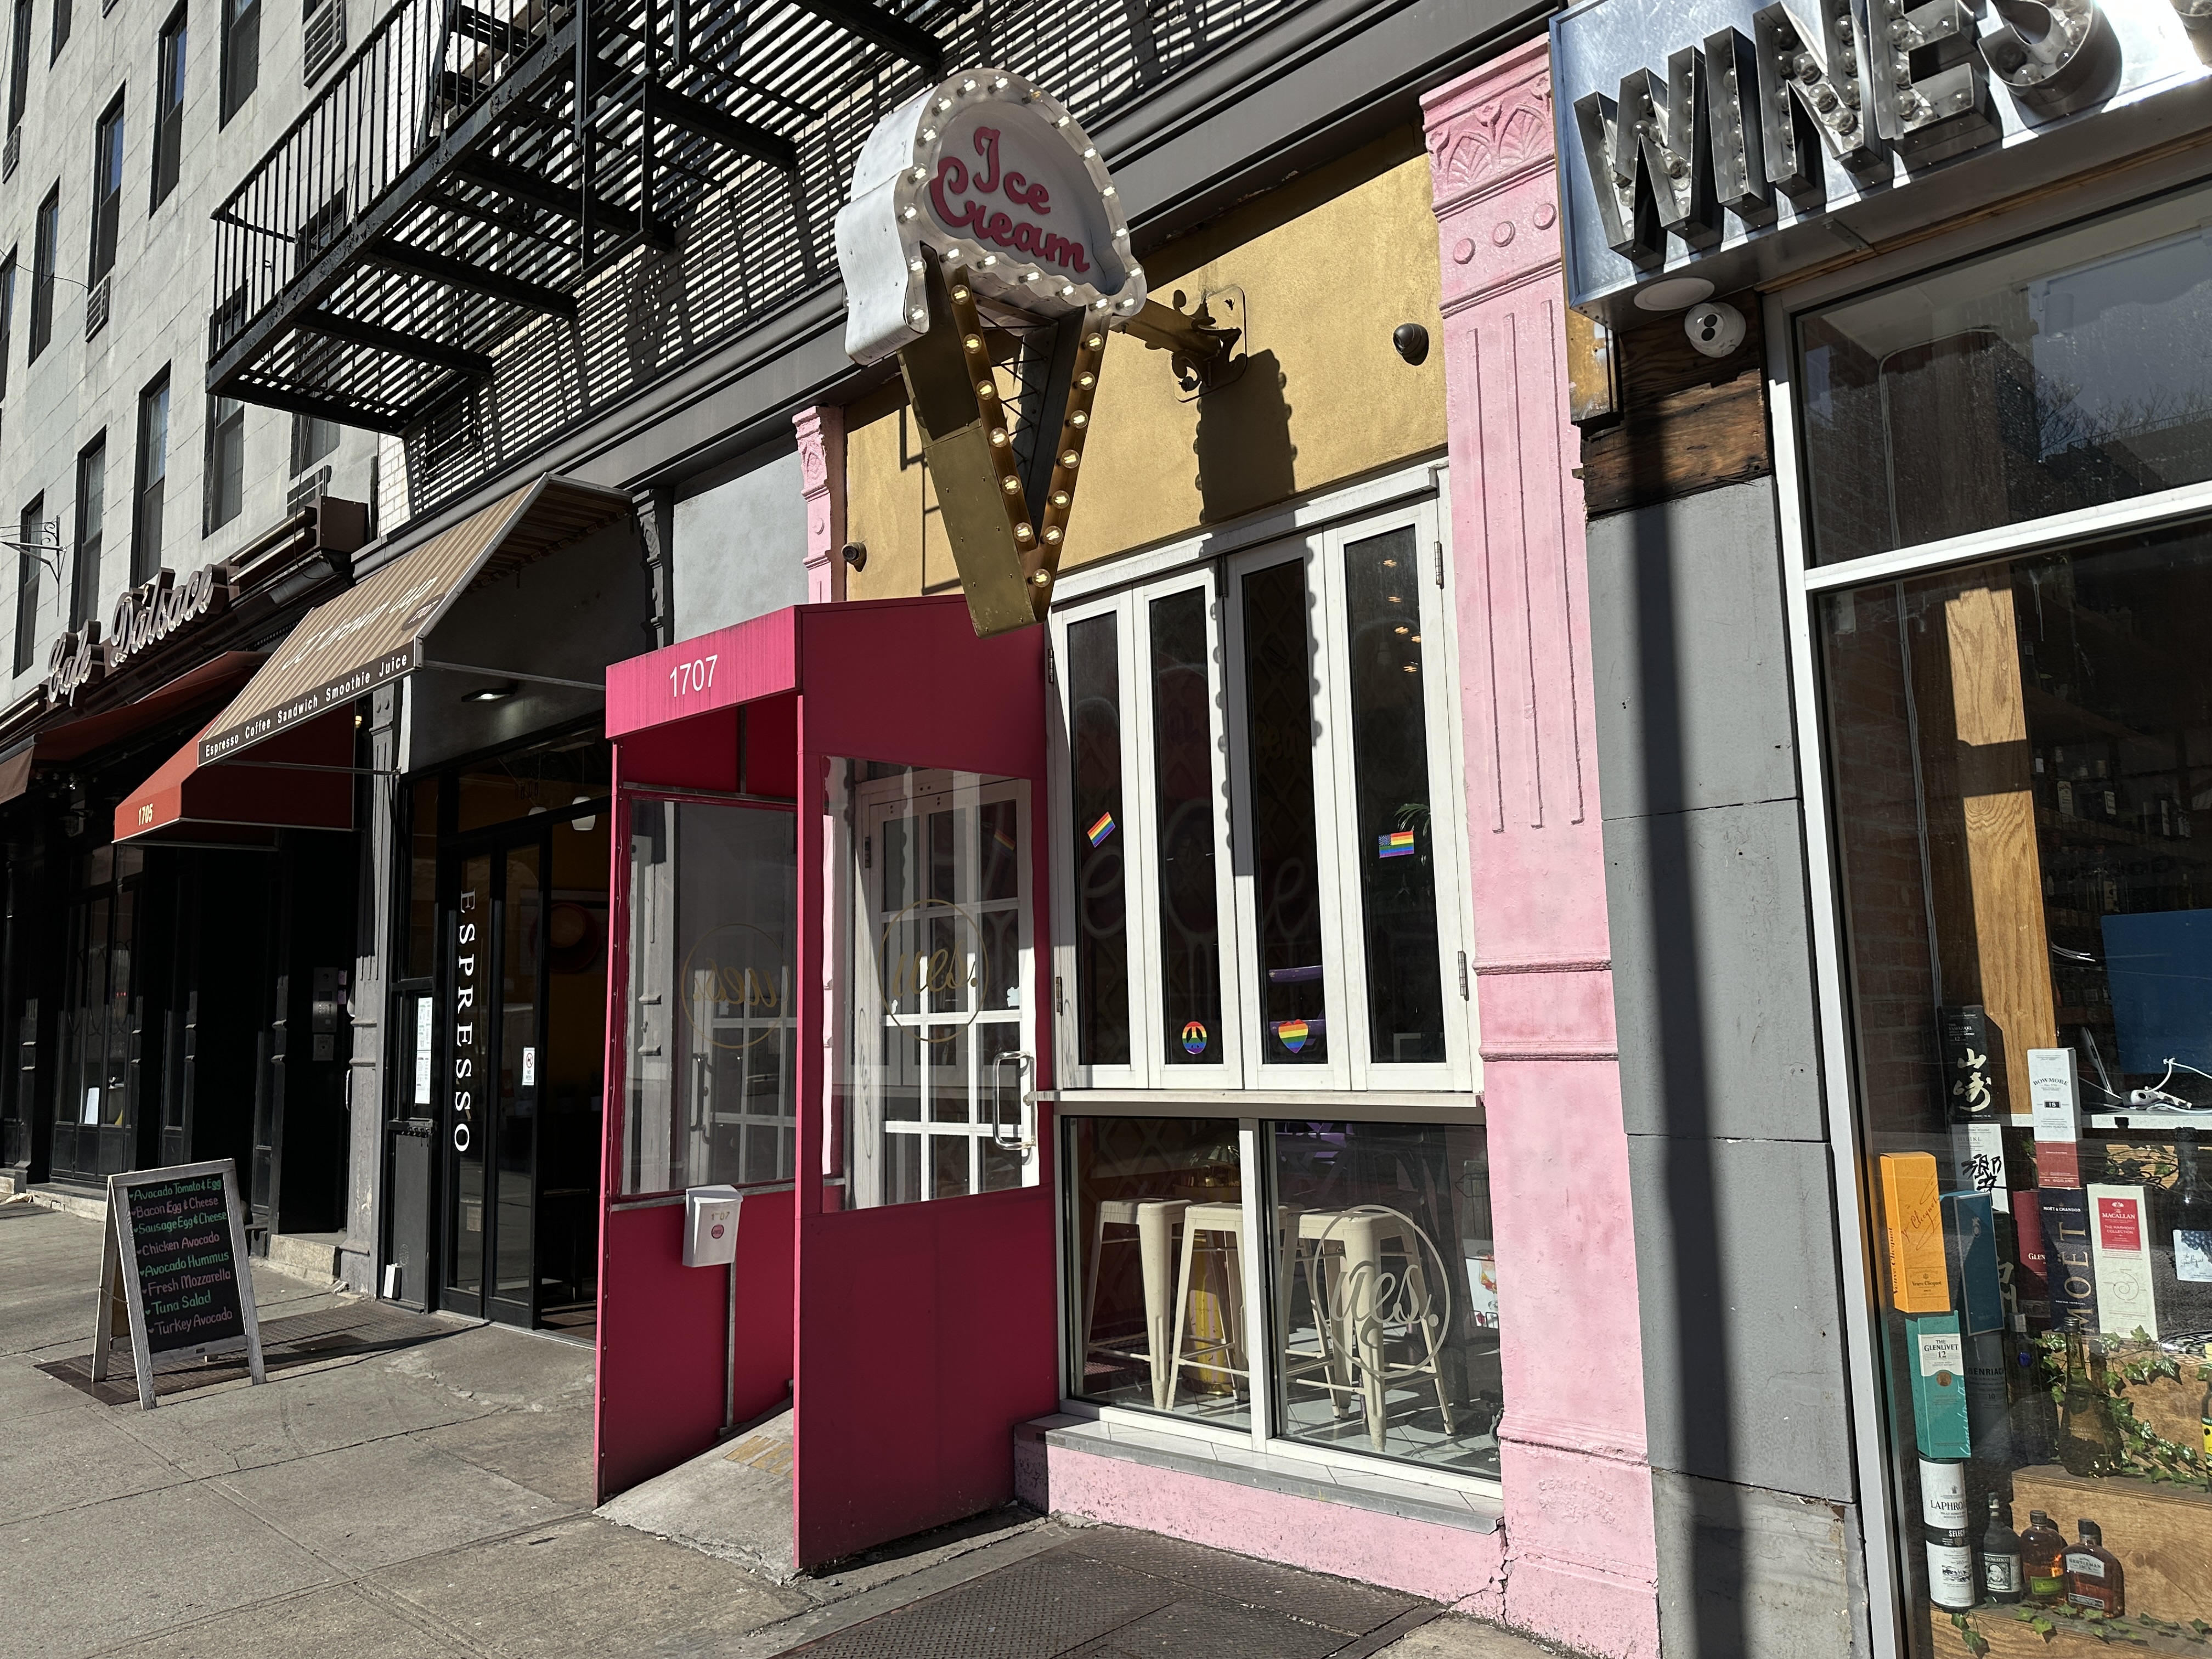 The UES ice cream shop and speakeasy is located at 1707 Second Avenue, between East 88th and 89th Streets | Upper East Site